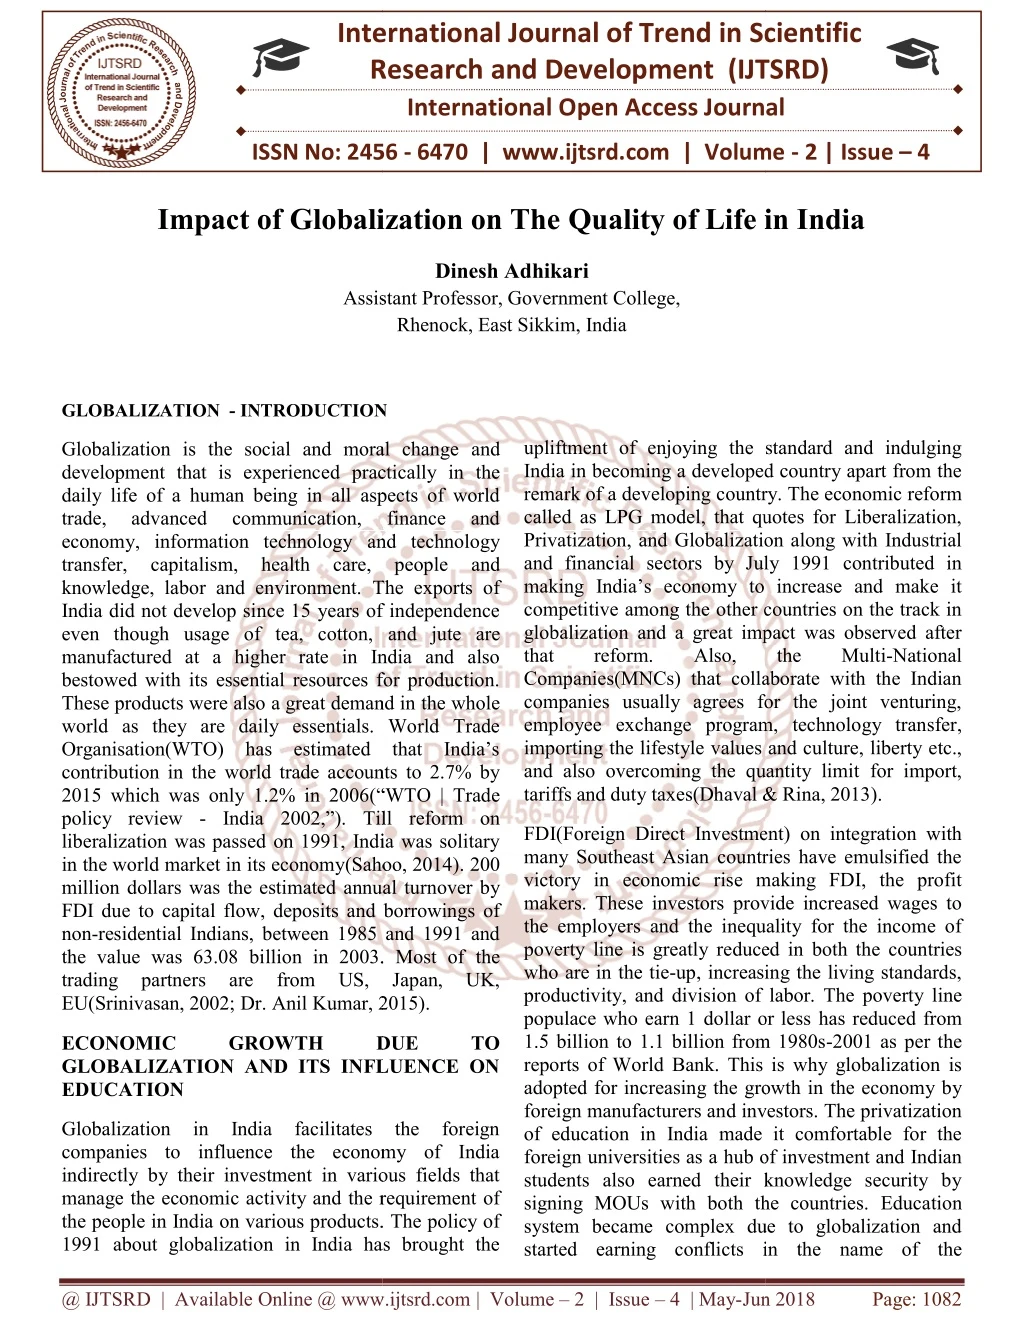 Impact of Globalization on The Quality of Life in India